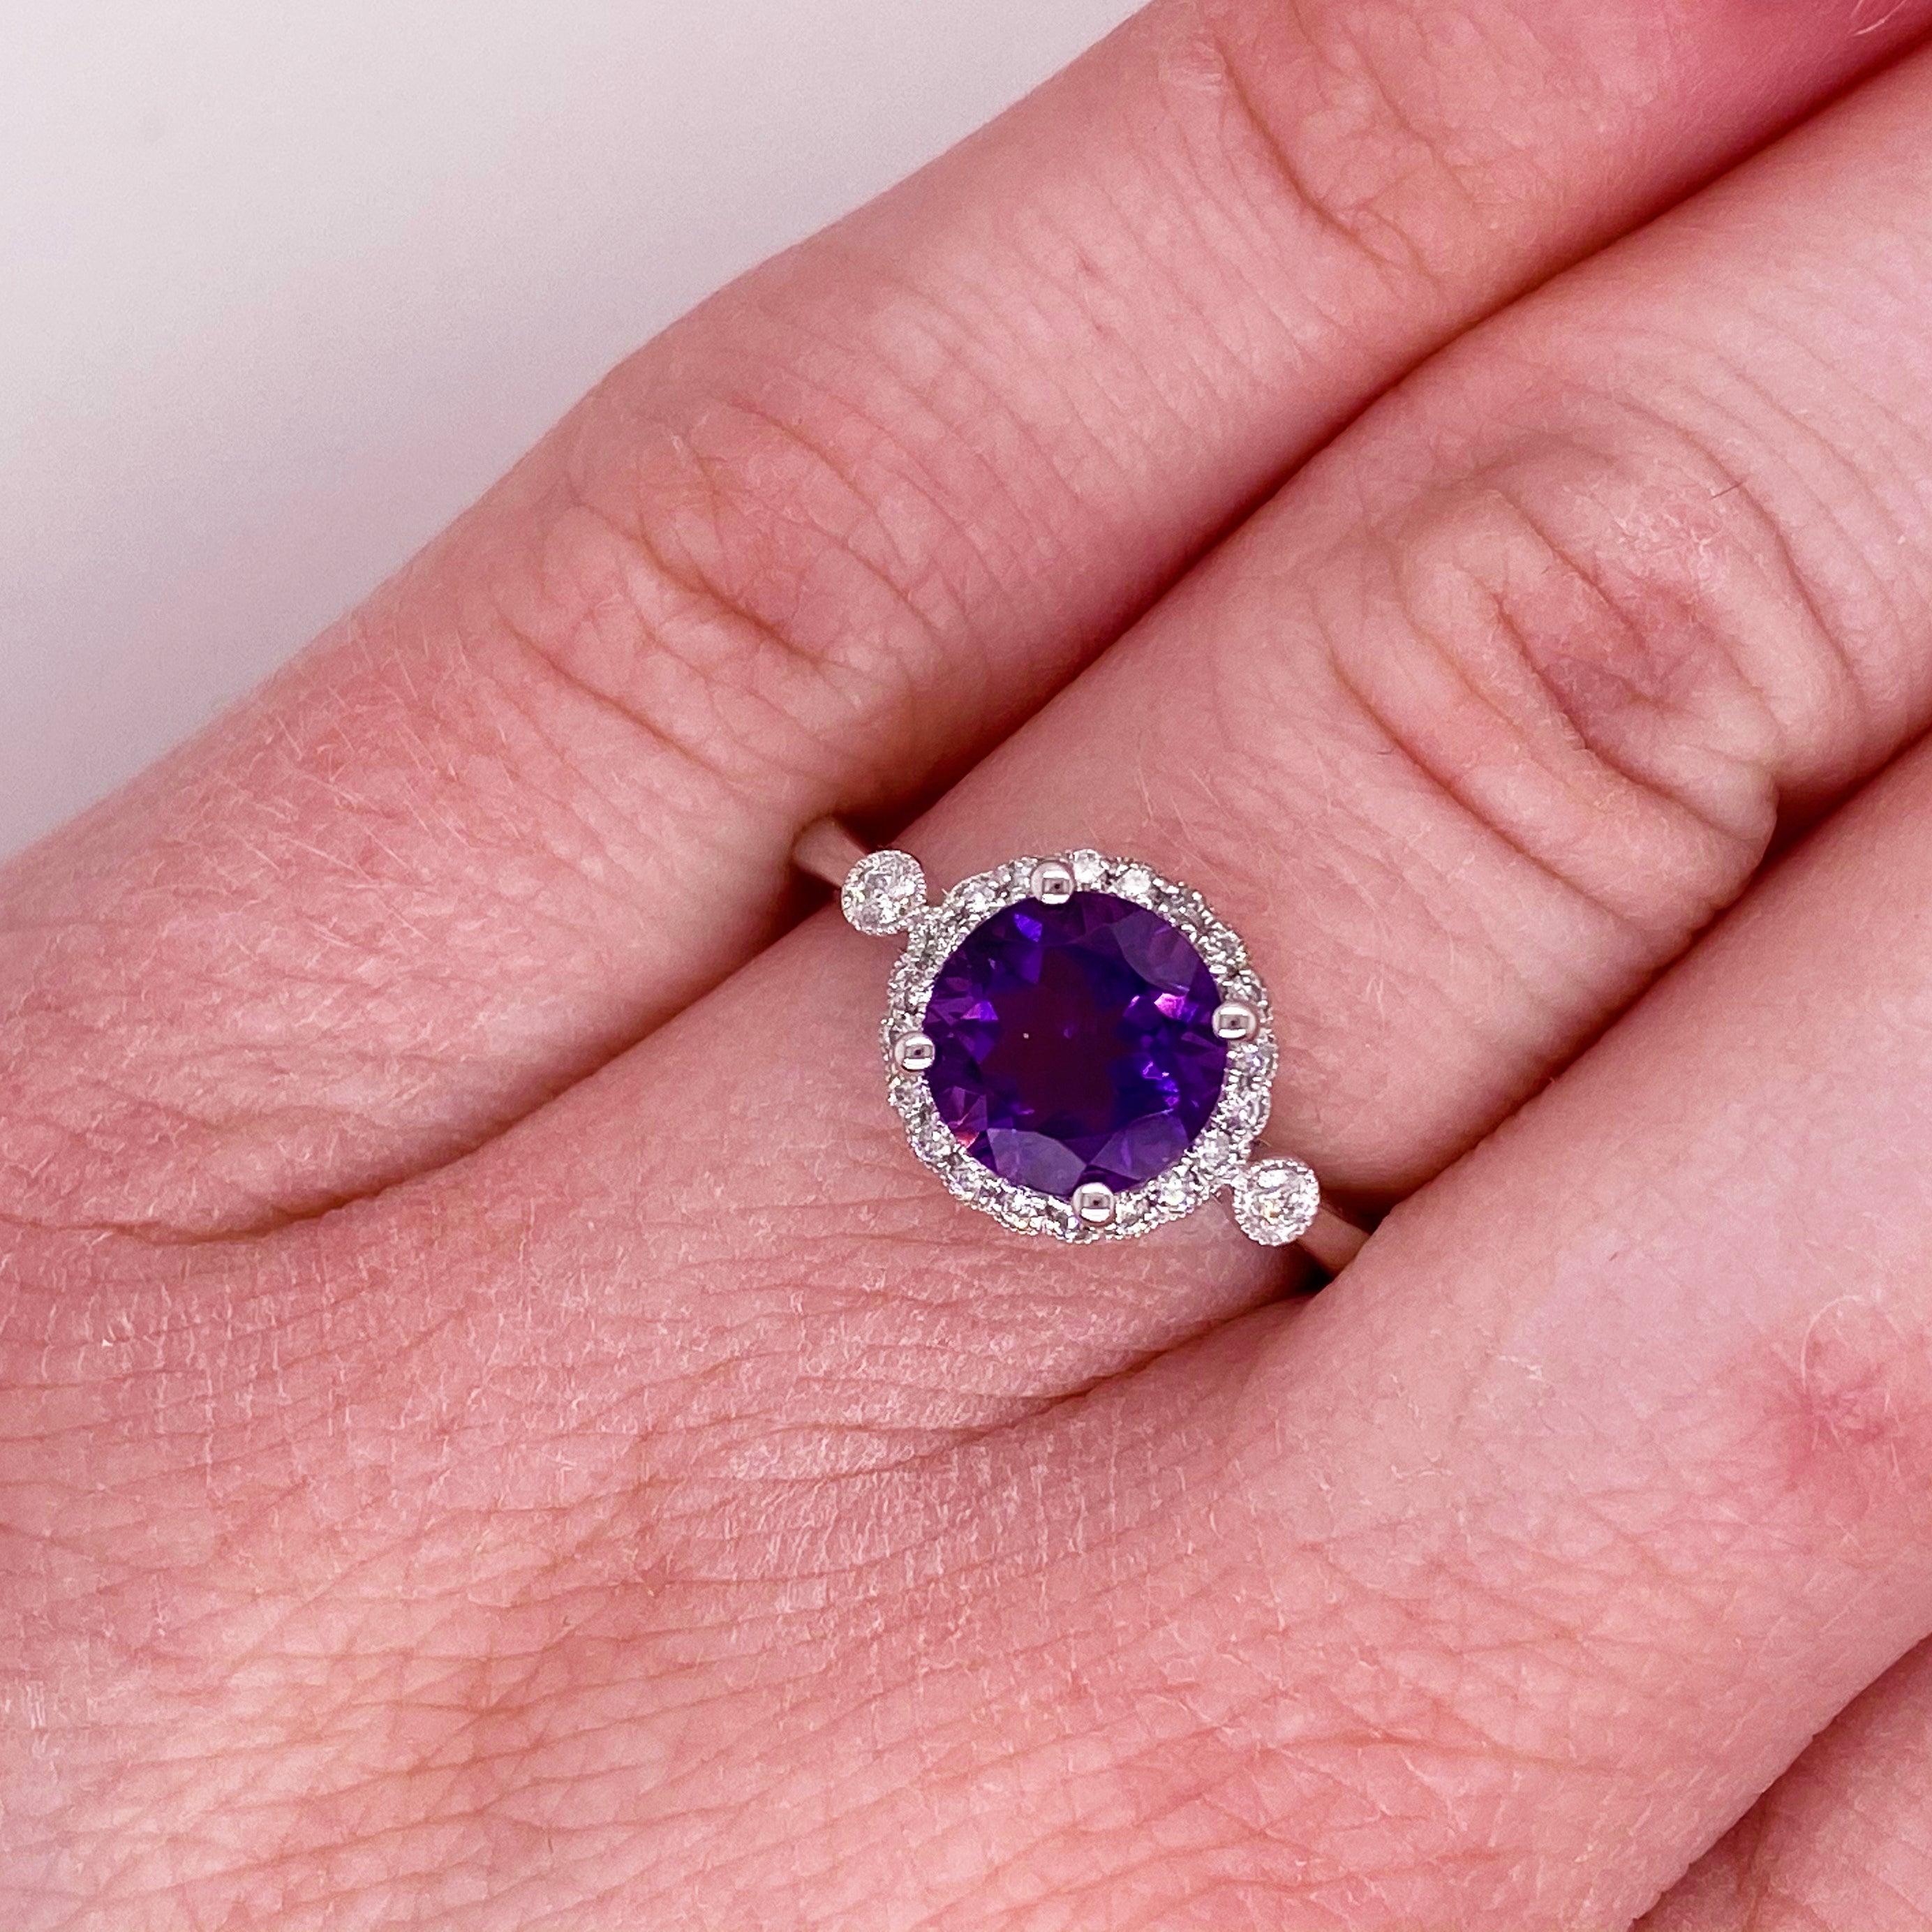 For Sale:  Amethyst Diamond Ring, Halo, Round, Engagement Ring Purple, 2.00 Carat Total Wt 2